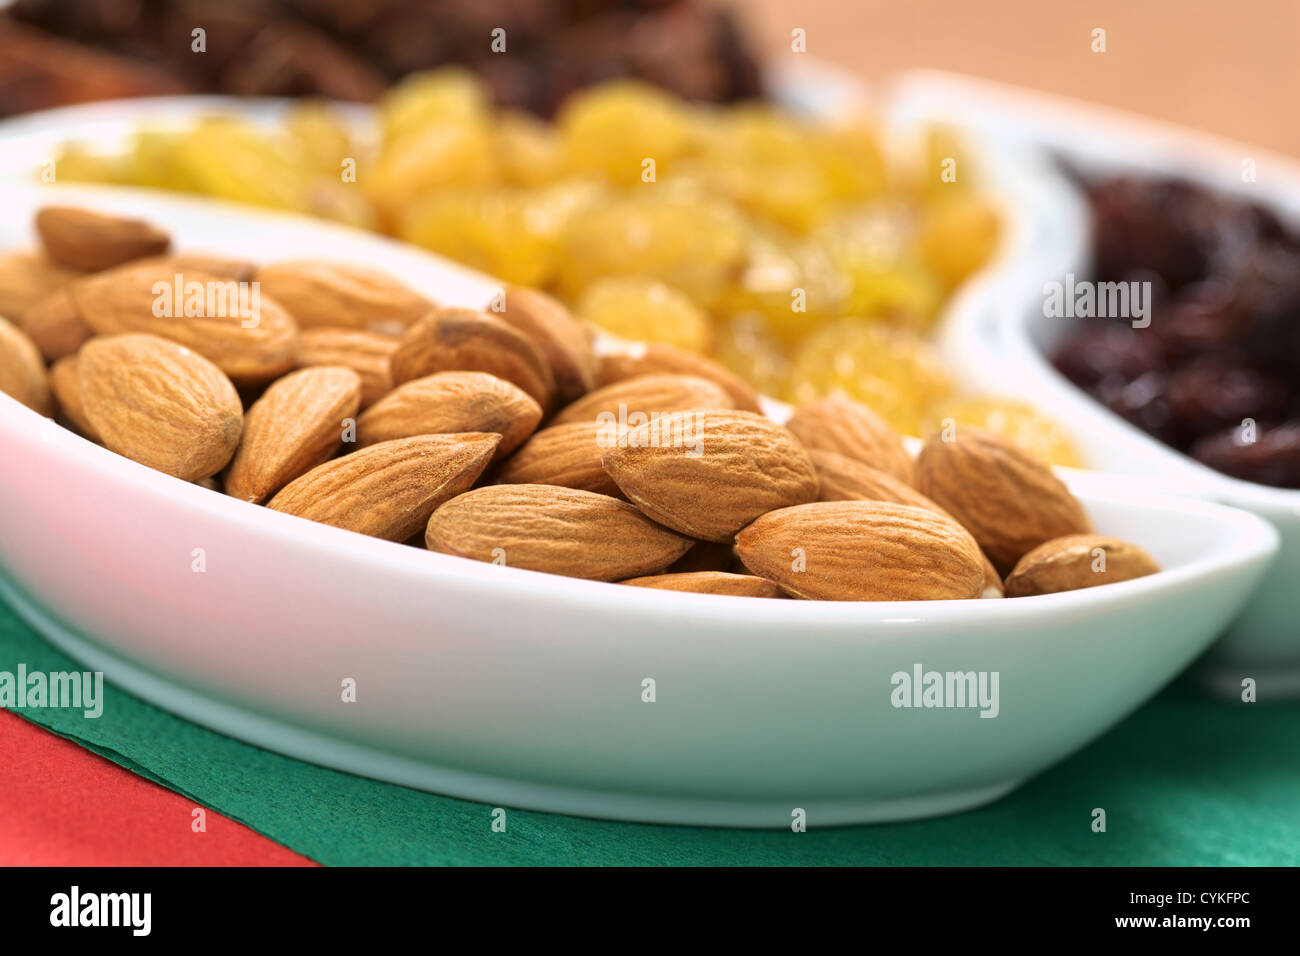 Almonds, sultanas and raisins in small bowls on red and green napkins (Selective Focus, Focus on the almonds in the front) Stock Photo